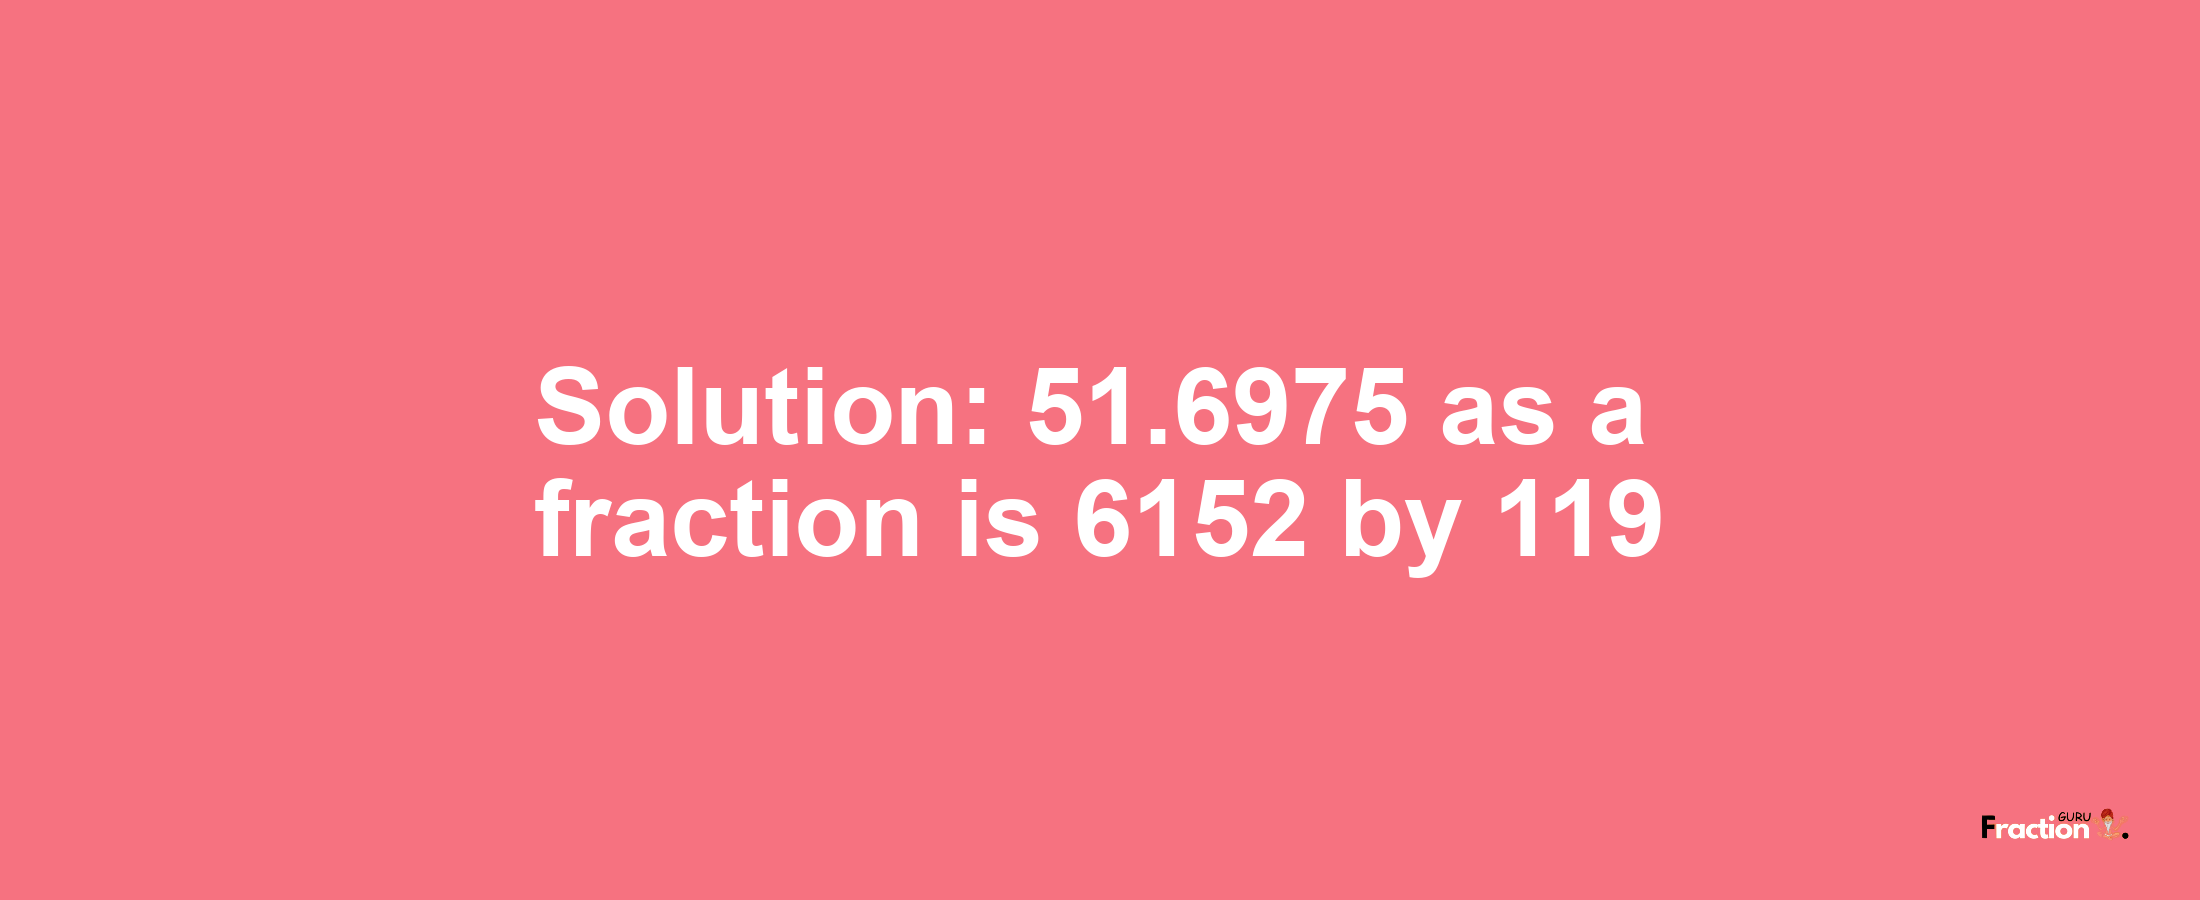 Solution:51.6975 as a fraction is 6152/119